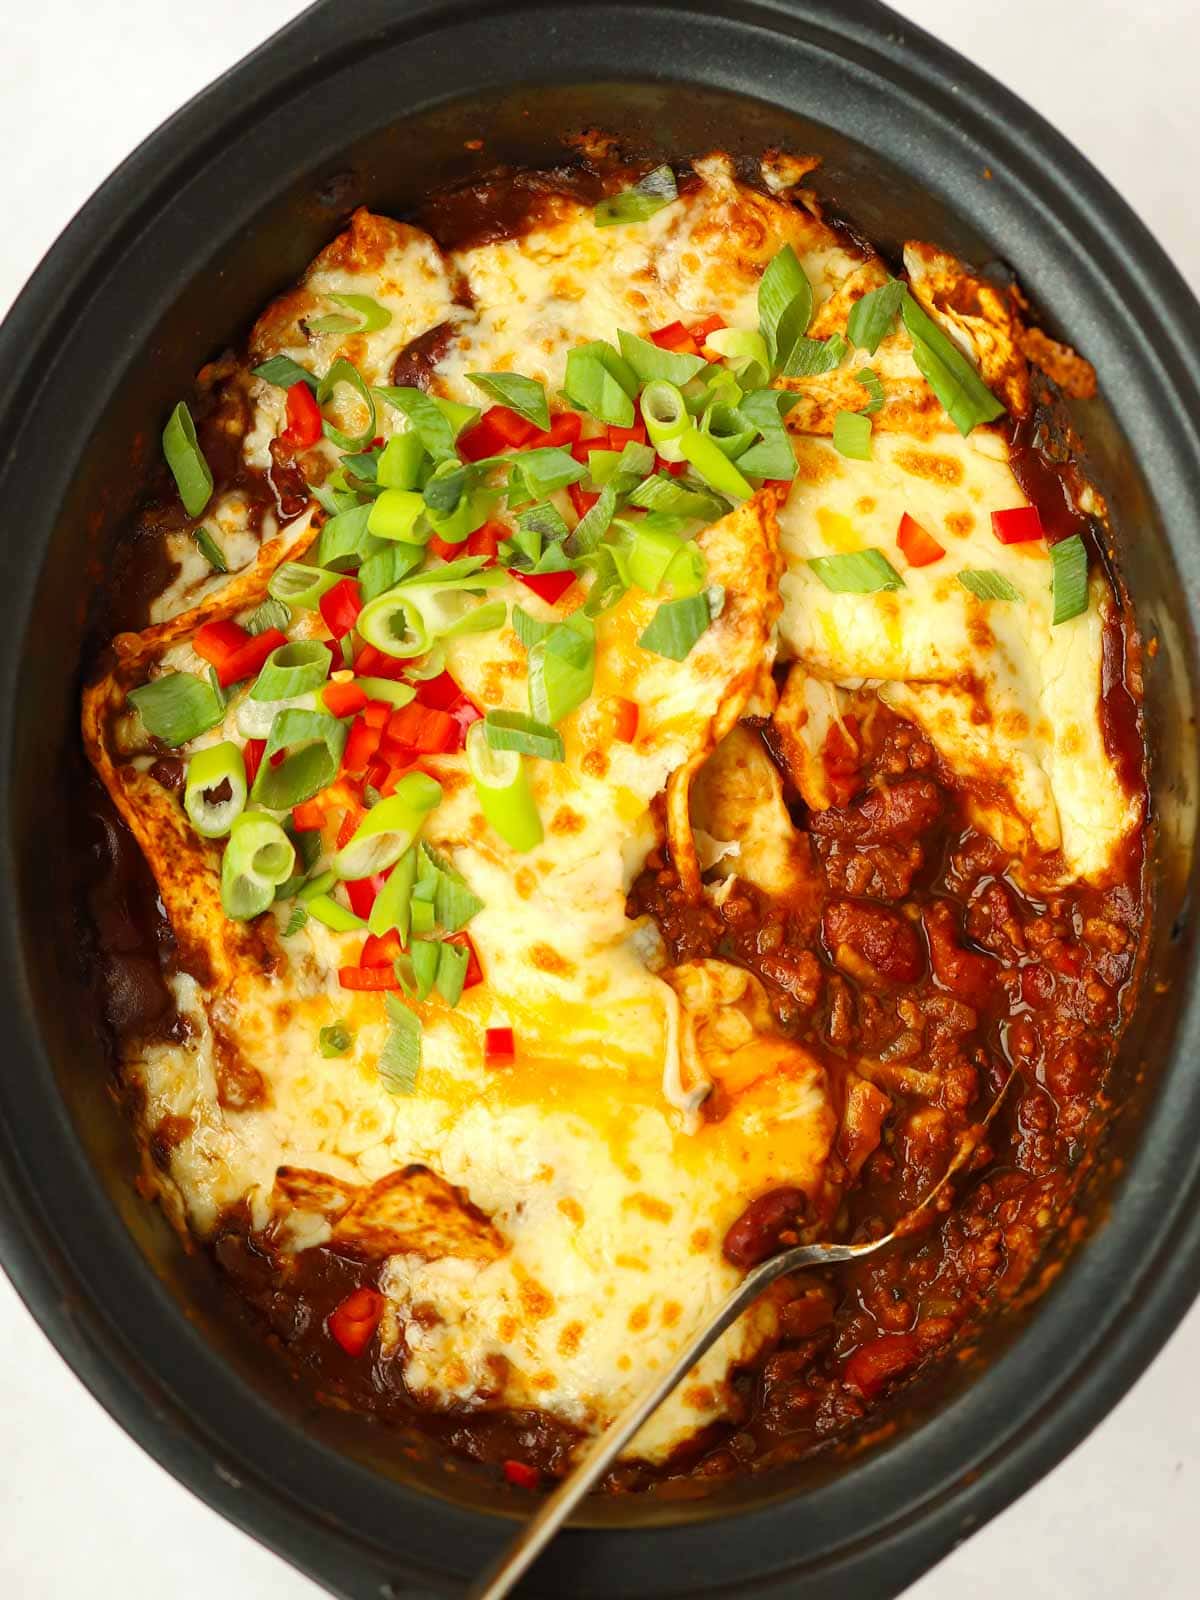 This delicious slow cooker beef enchiladas recipe is perfect for the whole family.